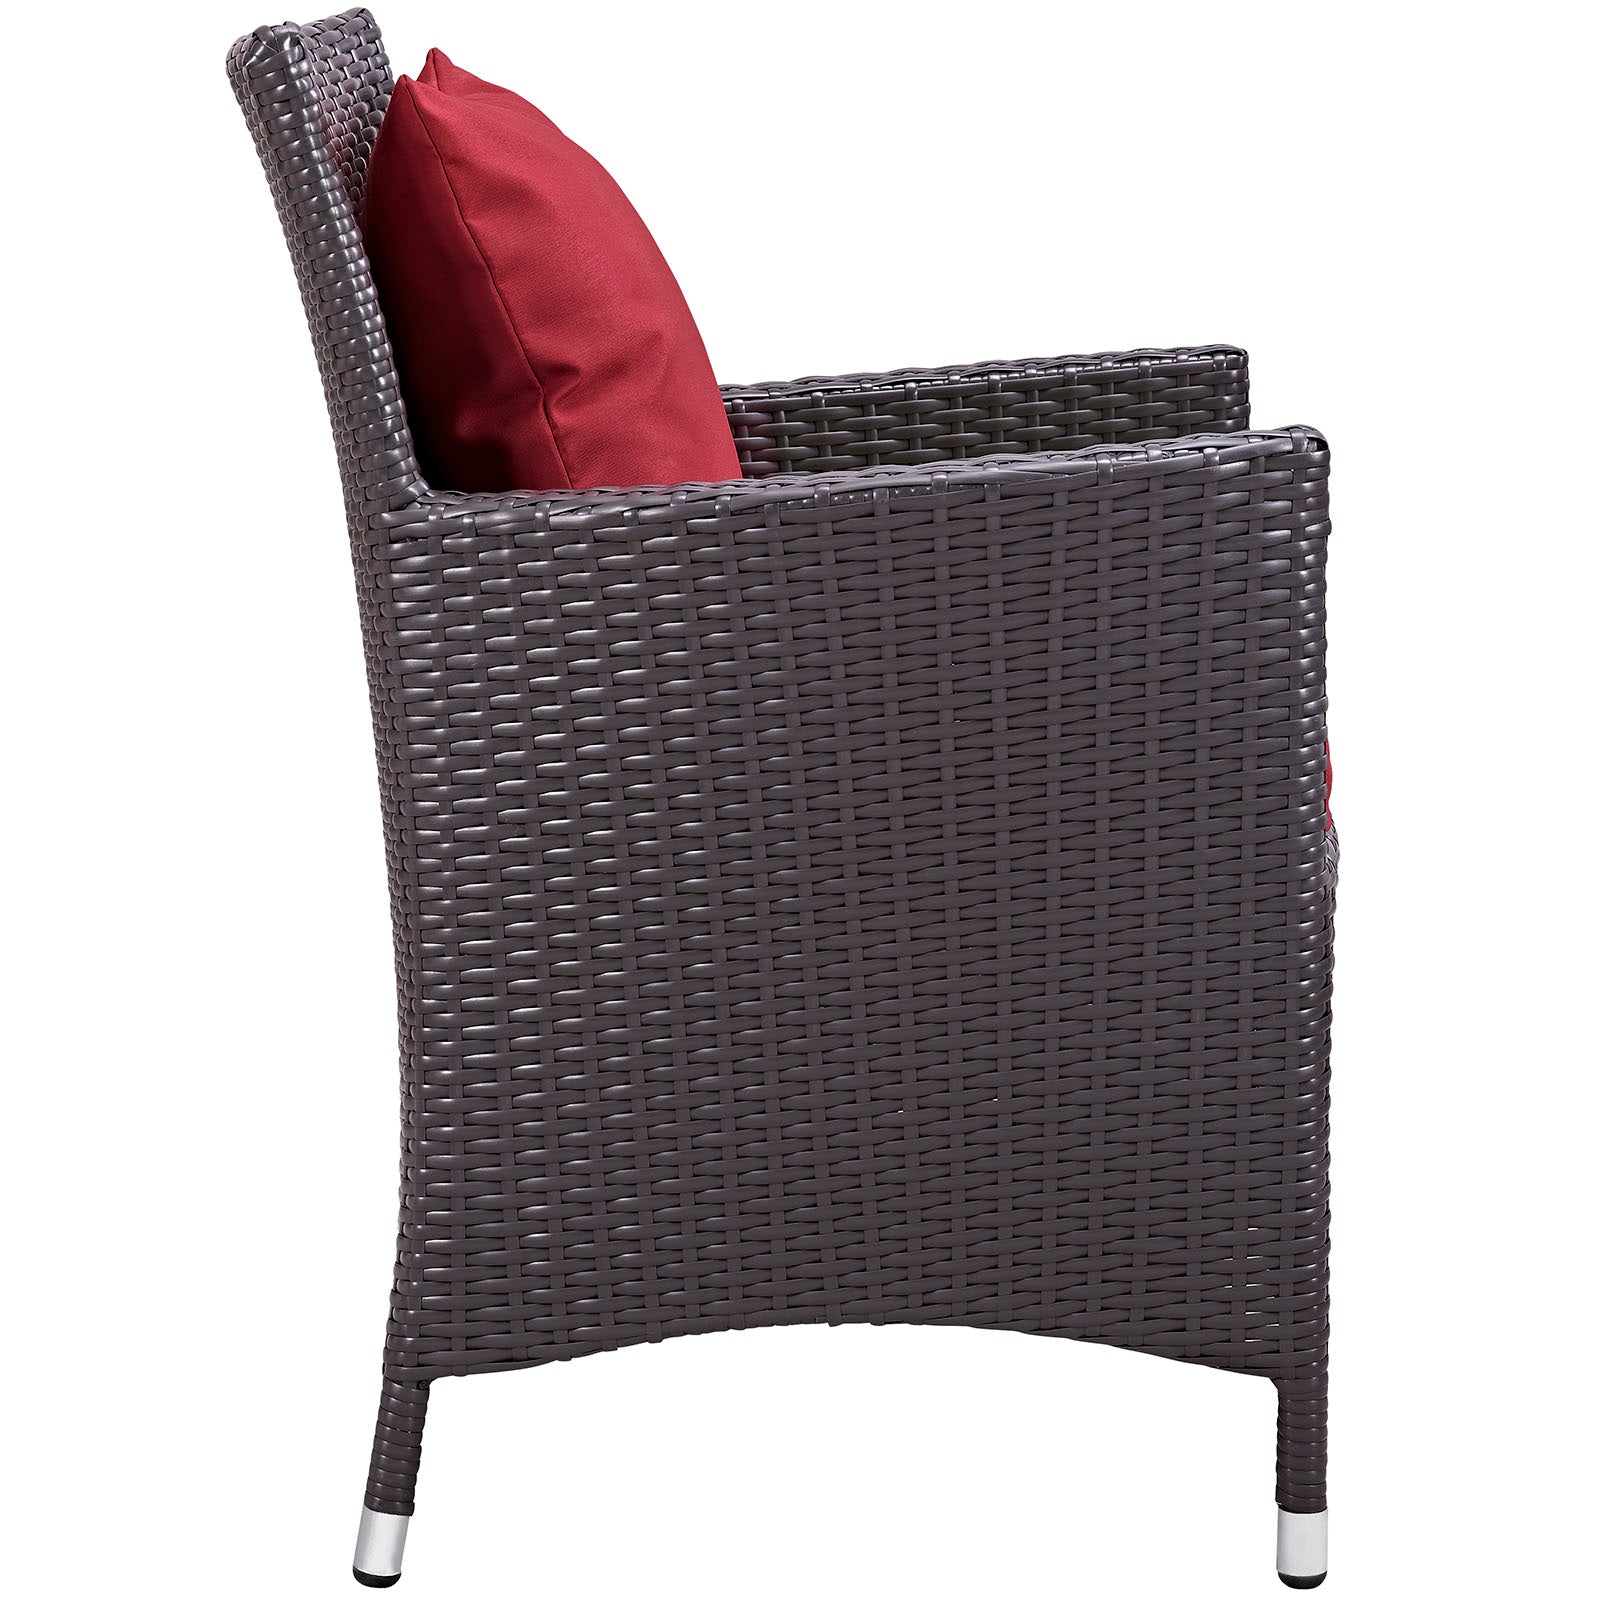 Modway Outdoor Dining Chairs - Convene Dining Outdoor Patio Armchair Espresso Red